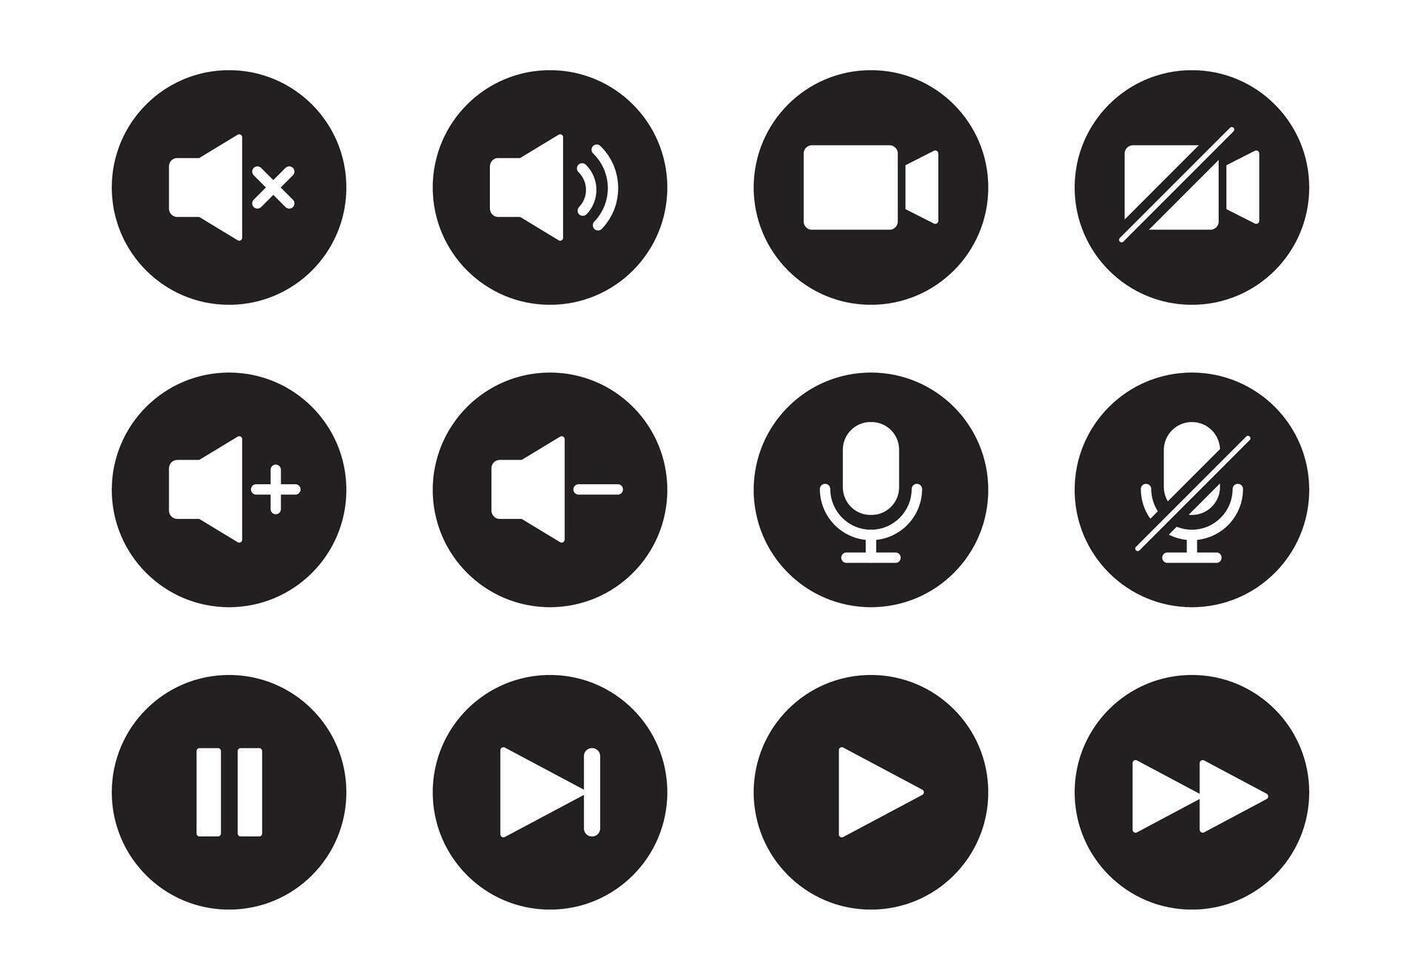 Audio, video, music player button icon. Sound control, play, pause button solid icon set. Camera, media control, microphone interface pictogram.  Vector